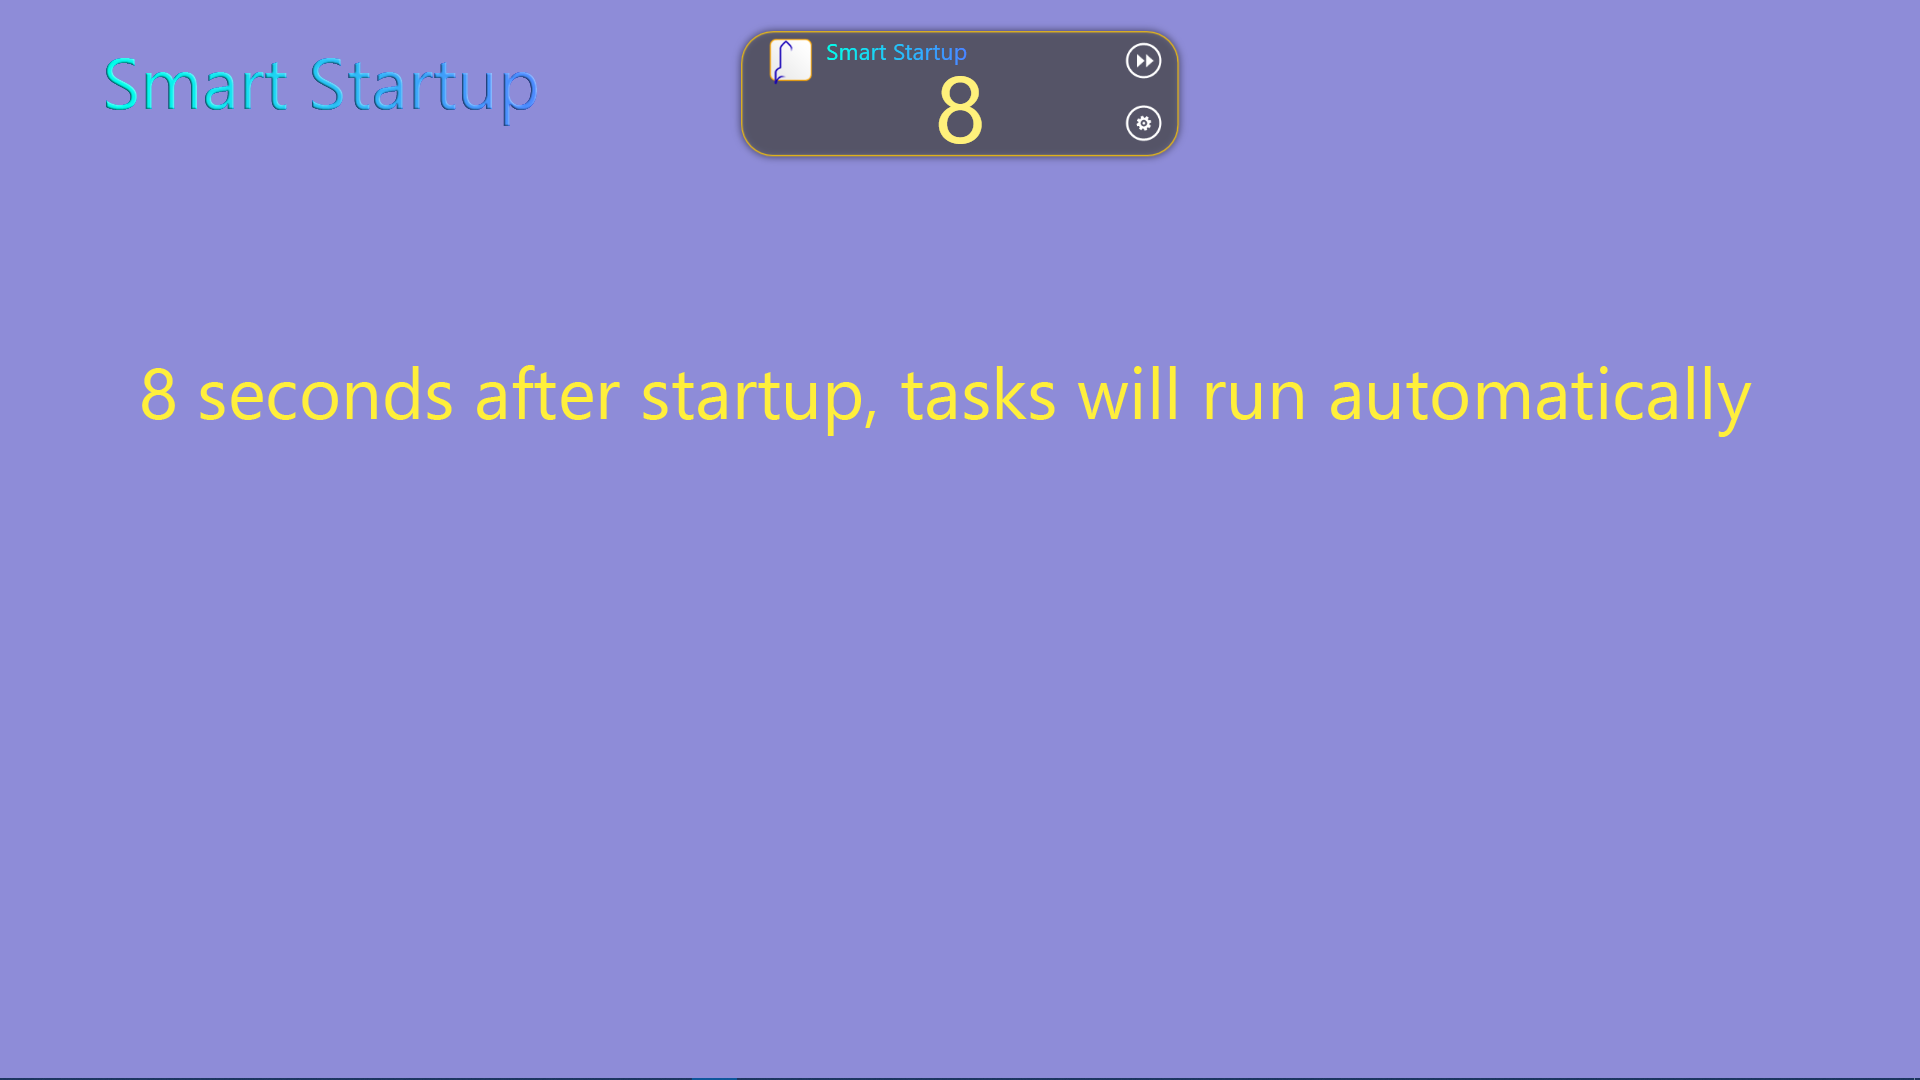 8 seconds after the startup of your device, if you did not deal with the app, it will run all your predefined tasks immediately.